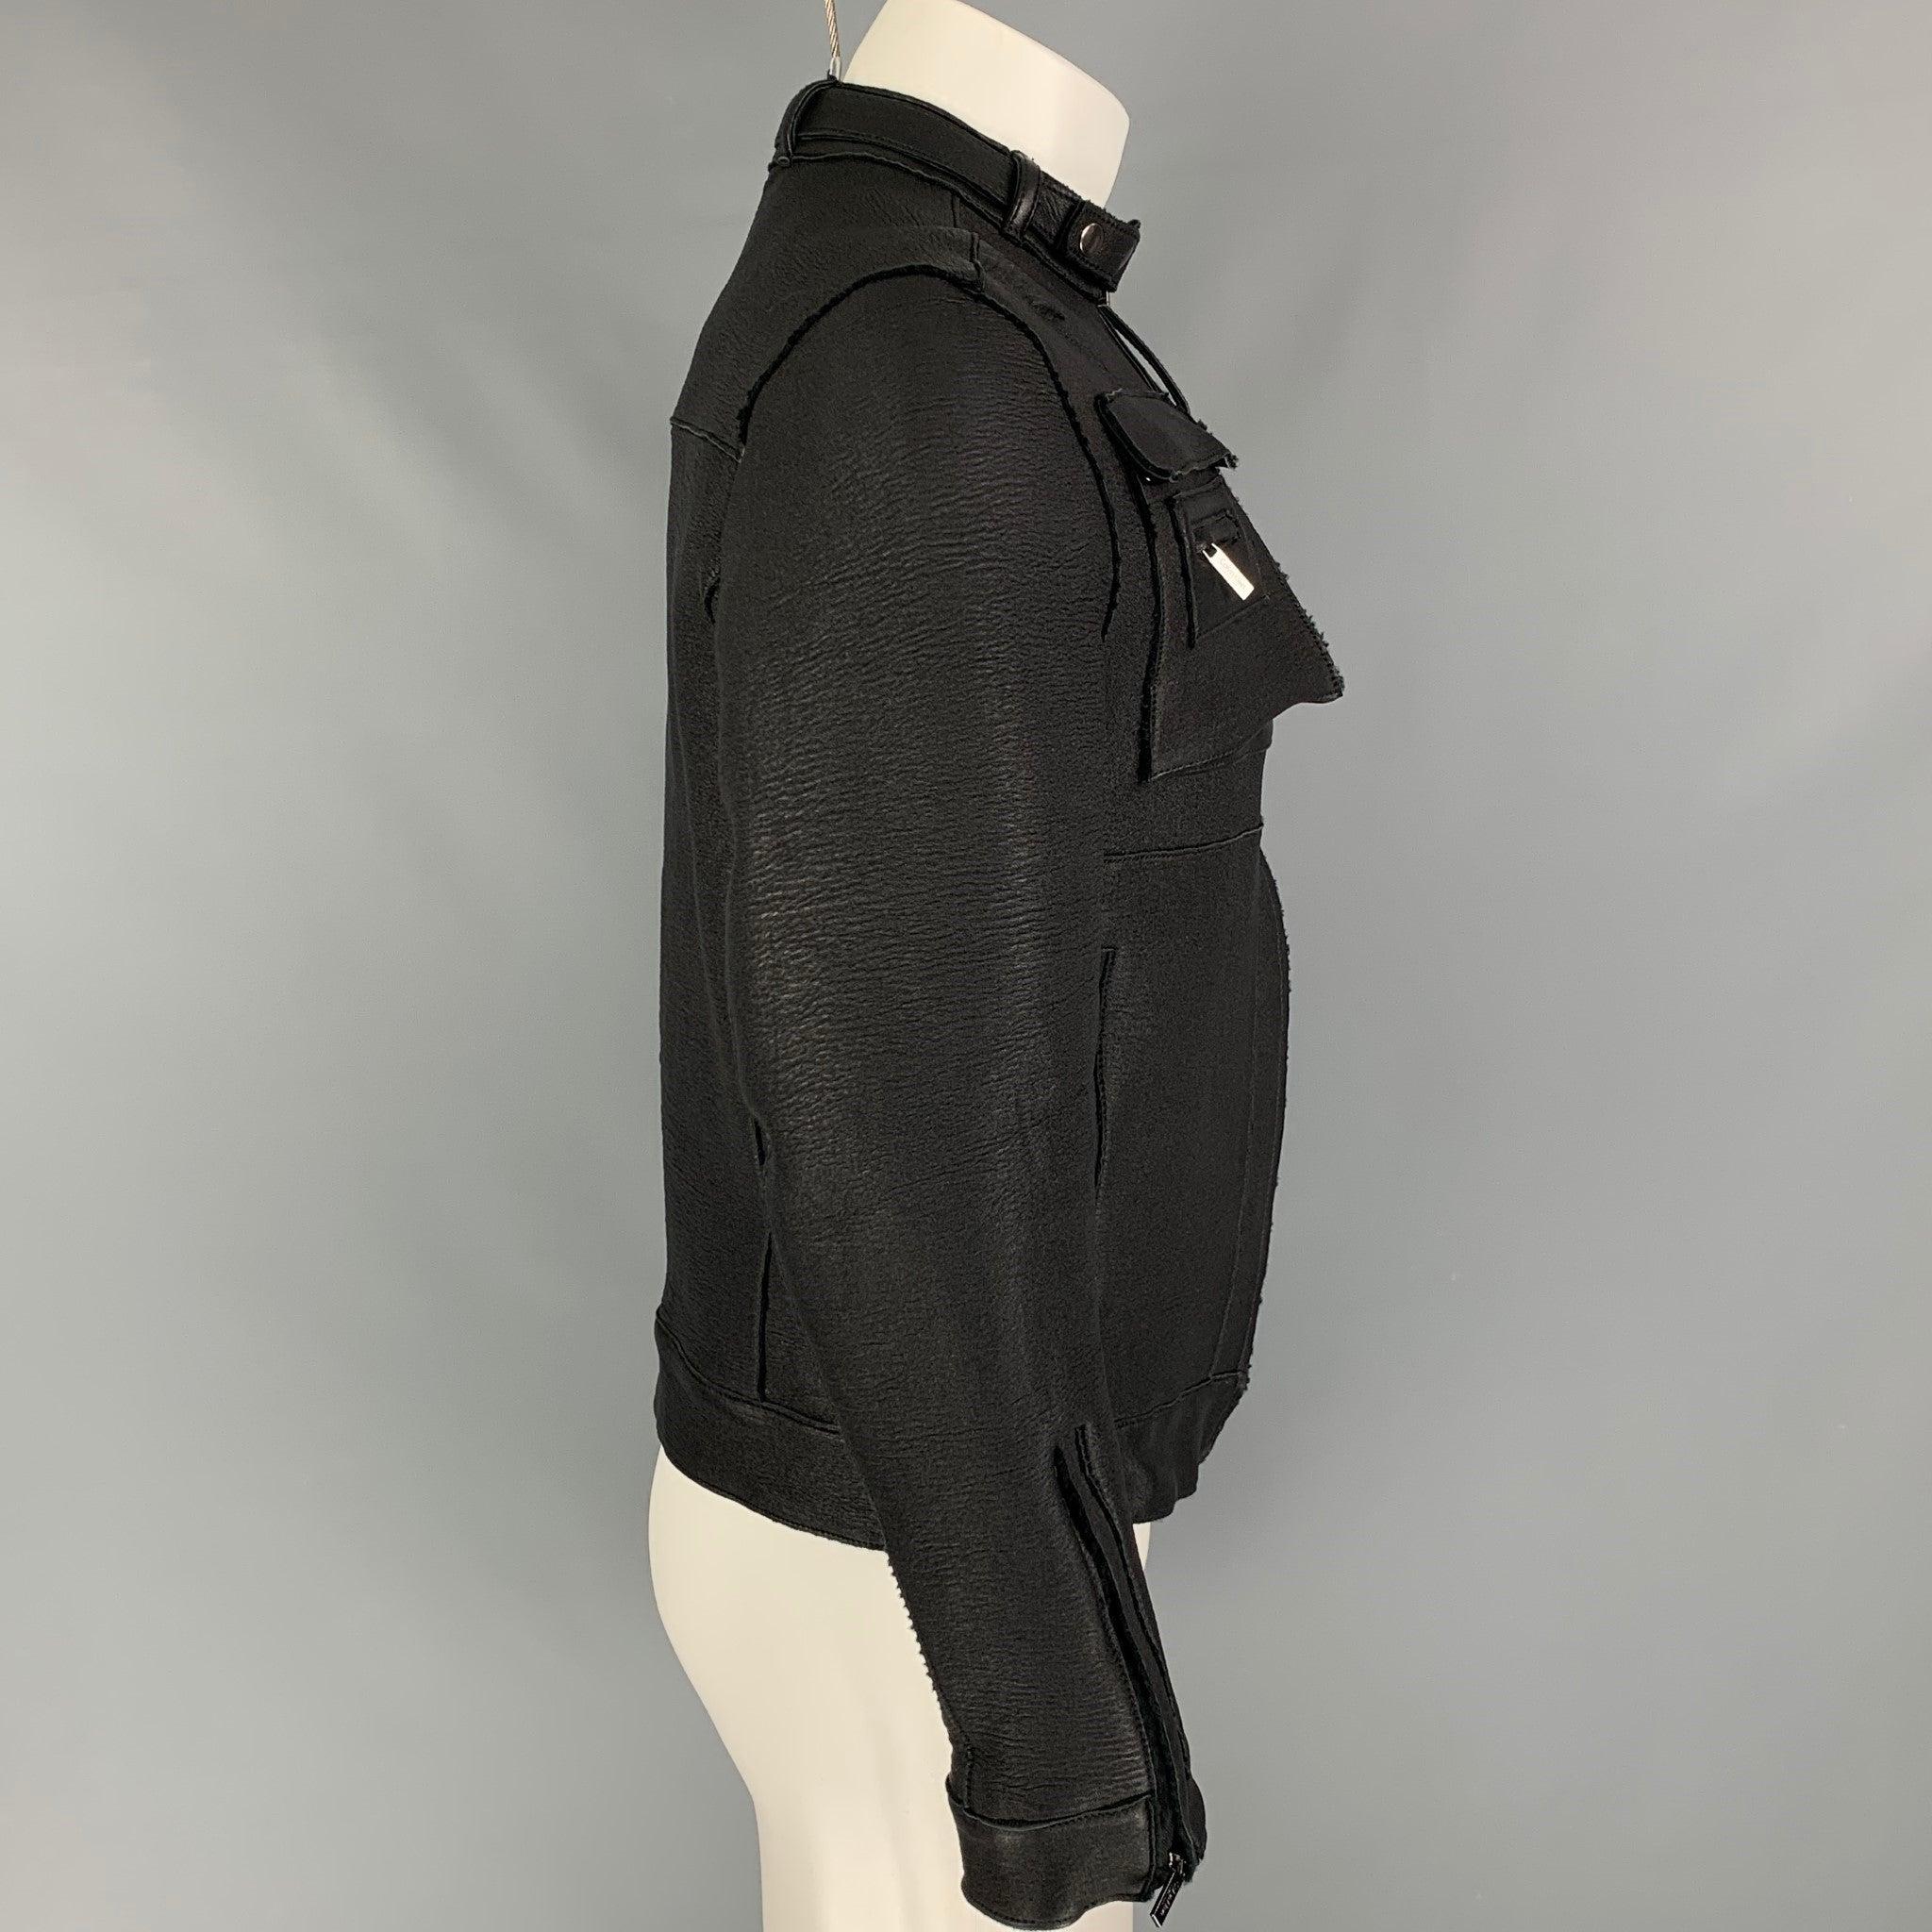 CALVIN KLEIN COLLECTION jacket comes in a black leather with a full liner featuring a motorcycle style, multiple front pockets, removable front collar strap, and a full zip up closure. Made in Italy.
Very Good
Pre-Owned Condition. 

Marked:   48/38